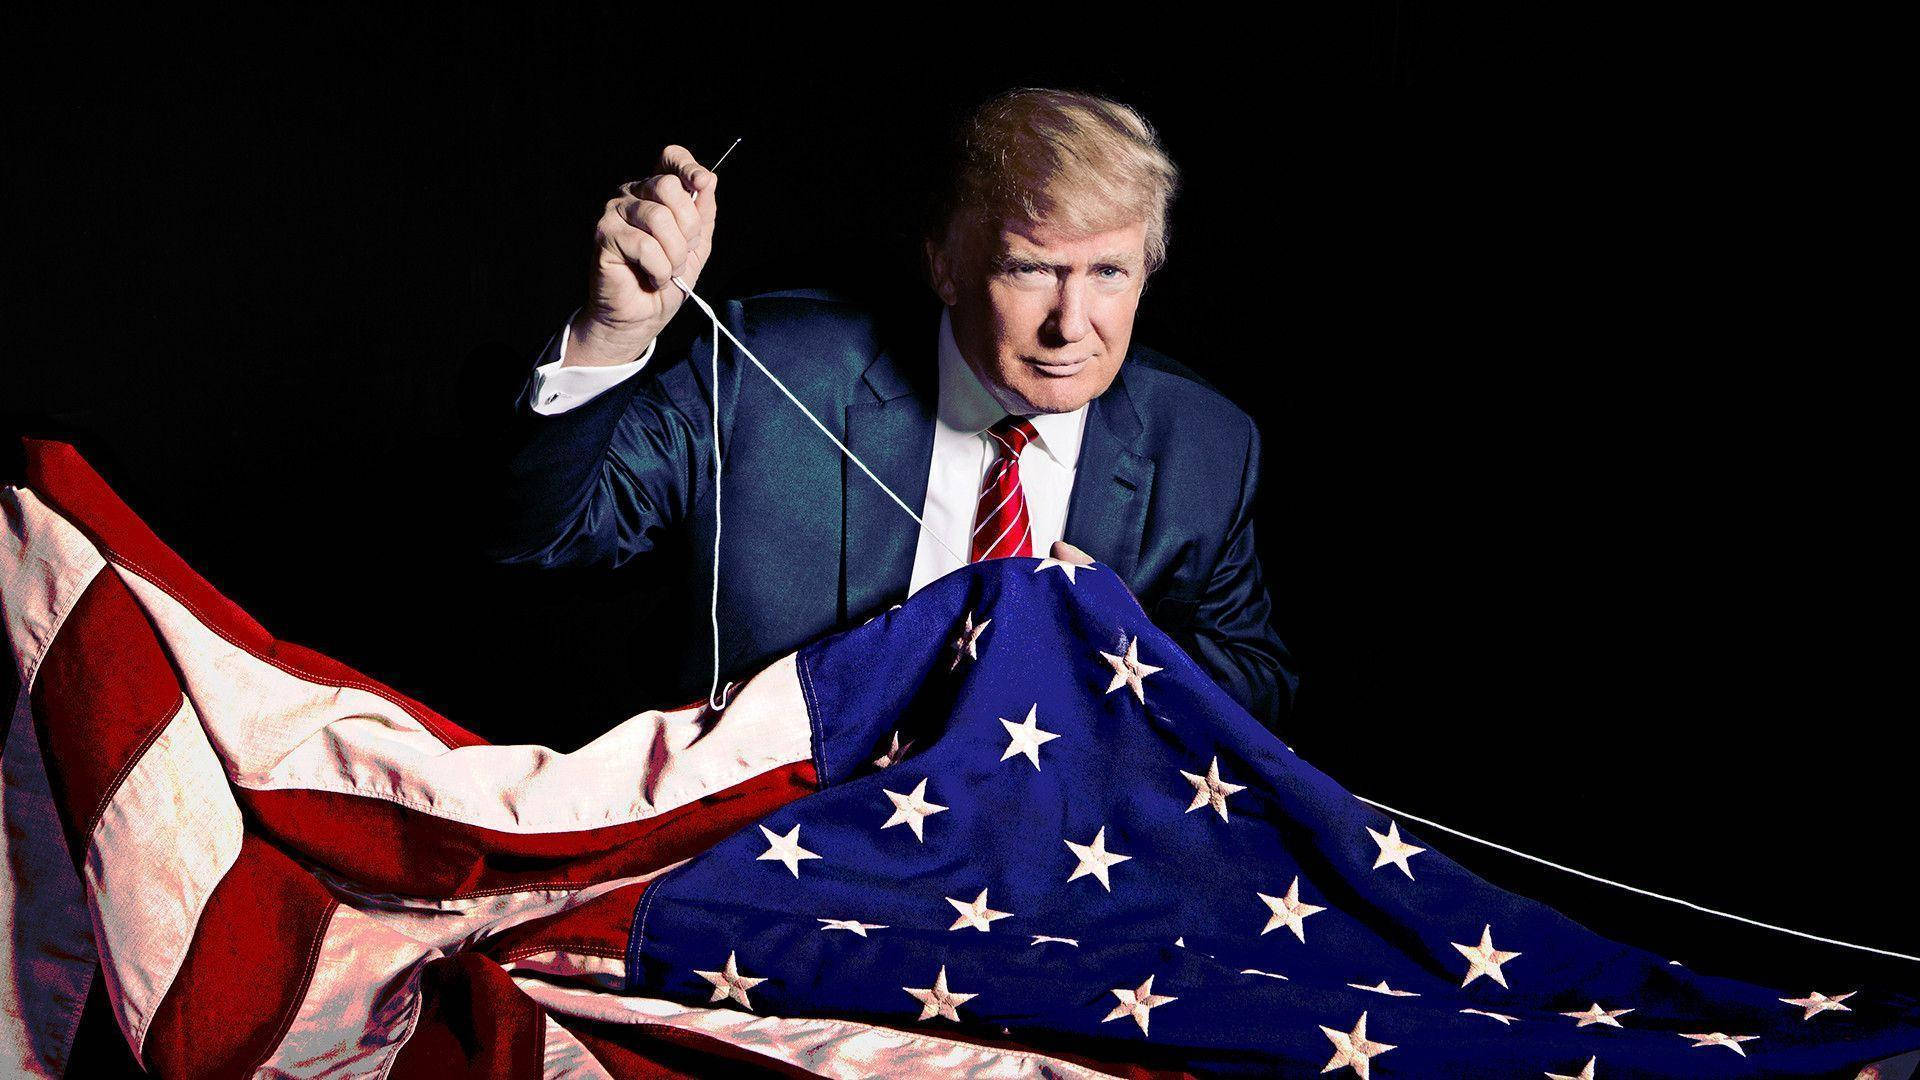 Donald Trump Stitching The American Flag Wallpaper